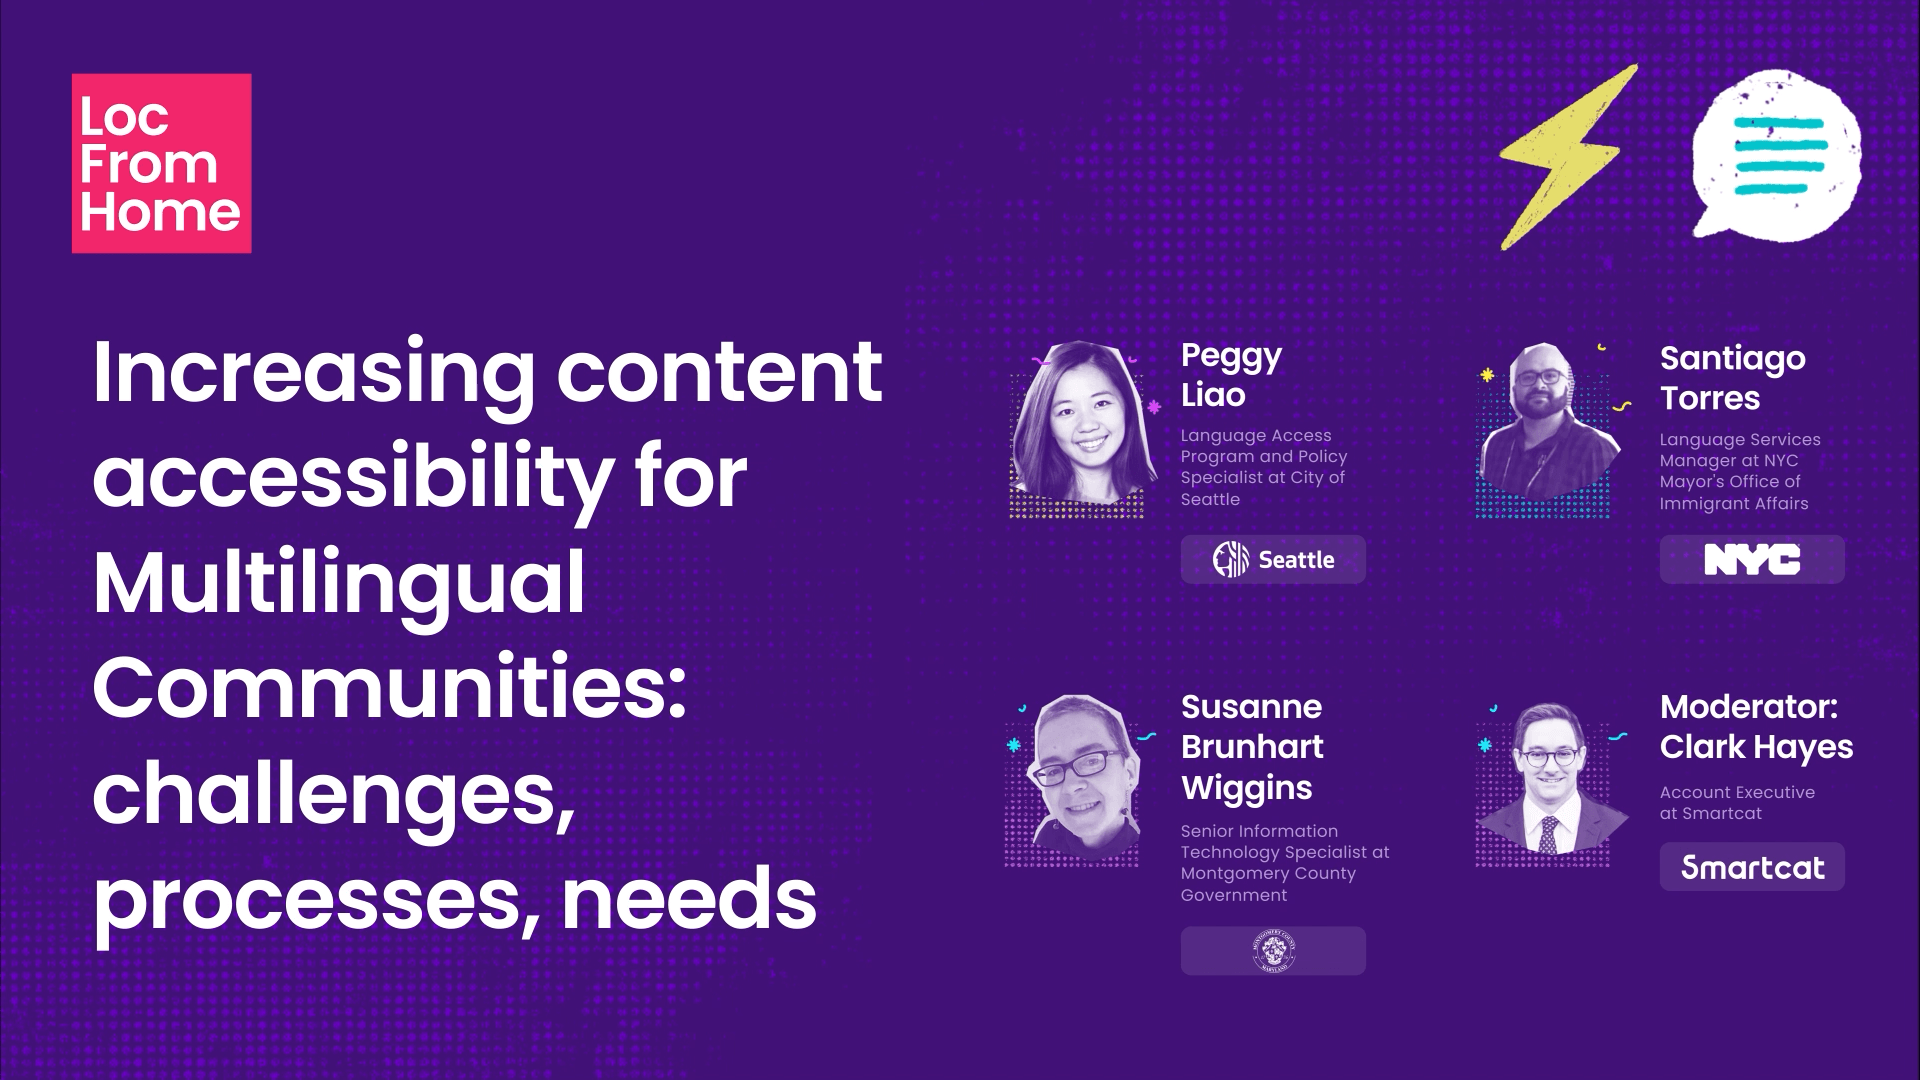 Increasing content accessibility for Multilingual Communities: challenges, processes, needs